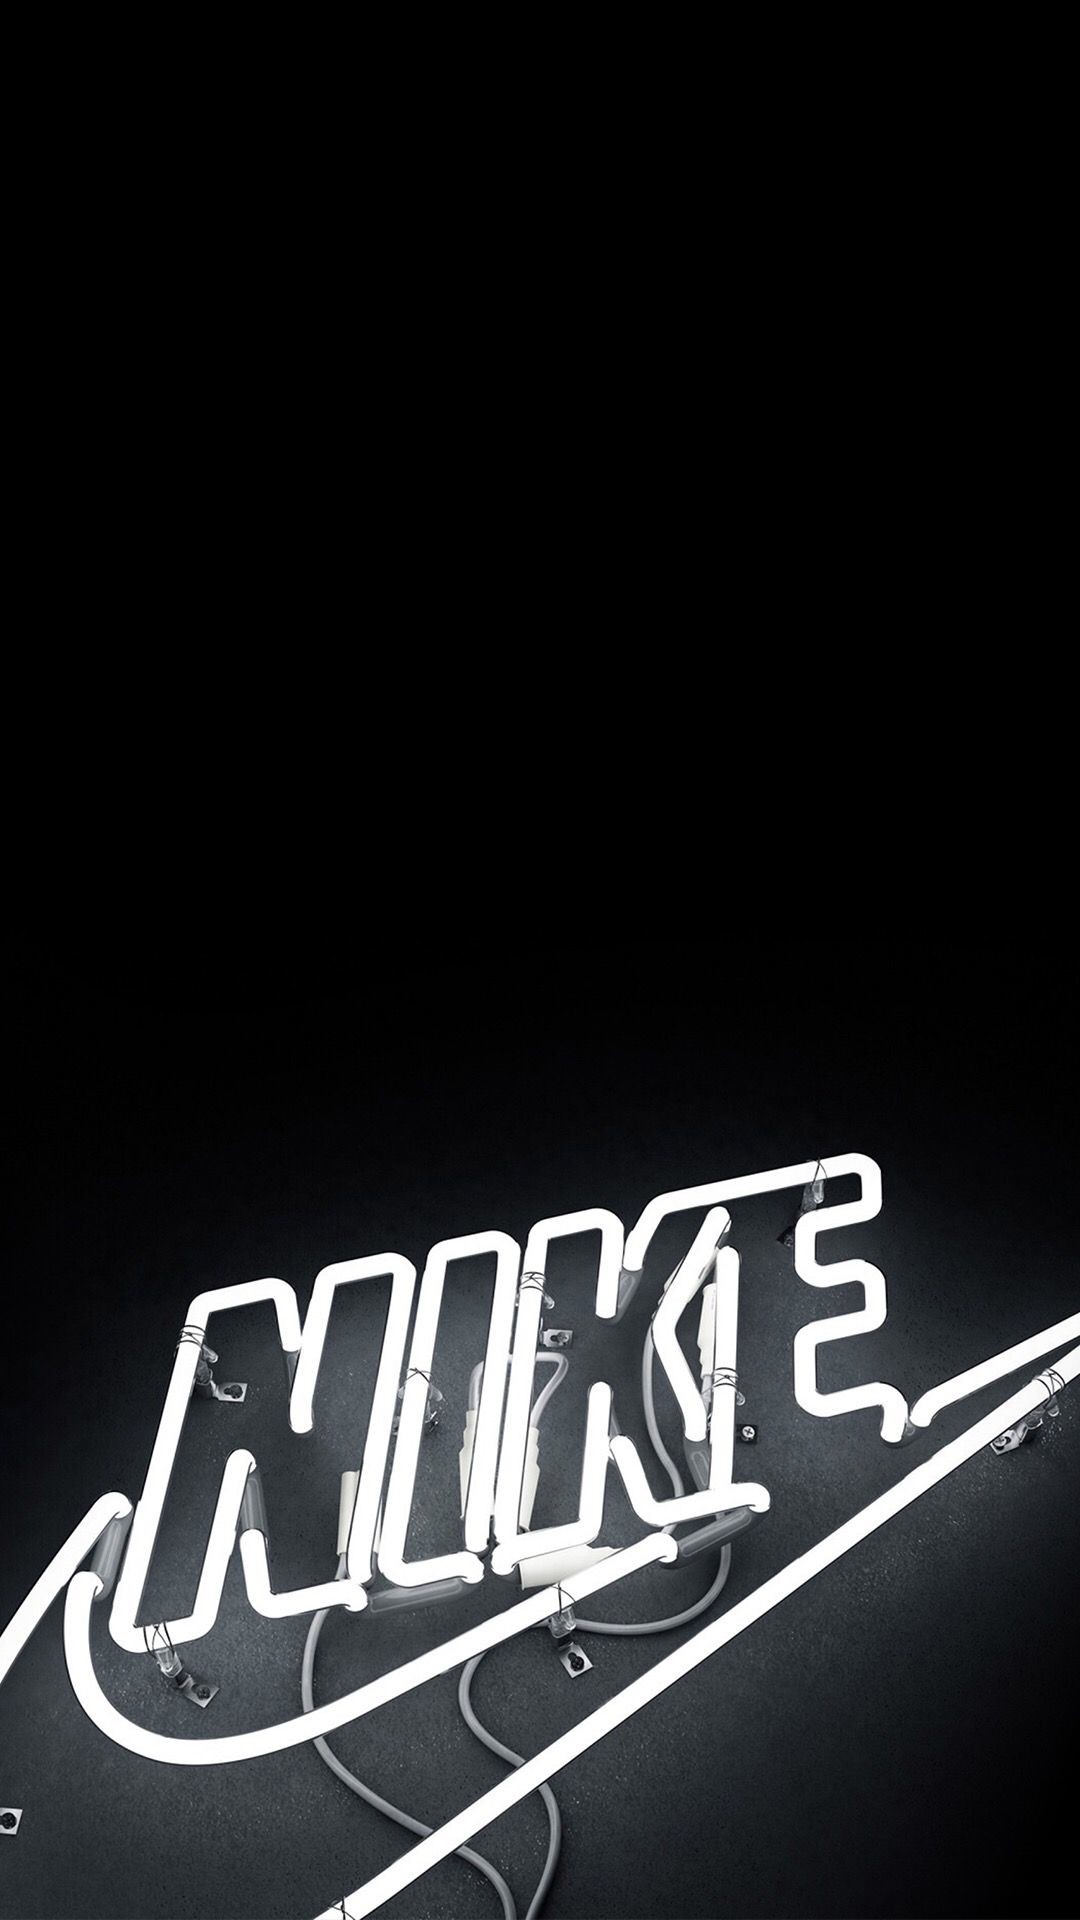 1080x1920 Nike Wallpaper, Ipod Wallpaper, Wallpaper Quotes, Wallpaper Backgrounds,  Sports Wallpapers, Iphone